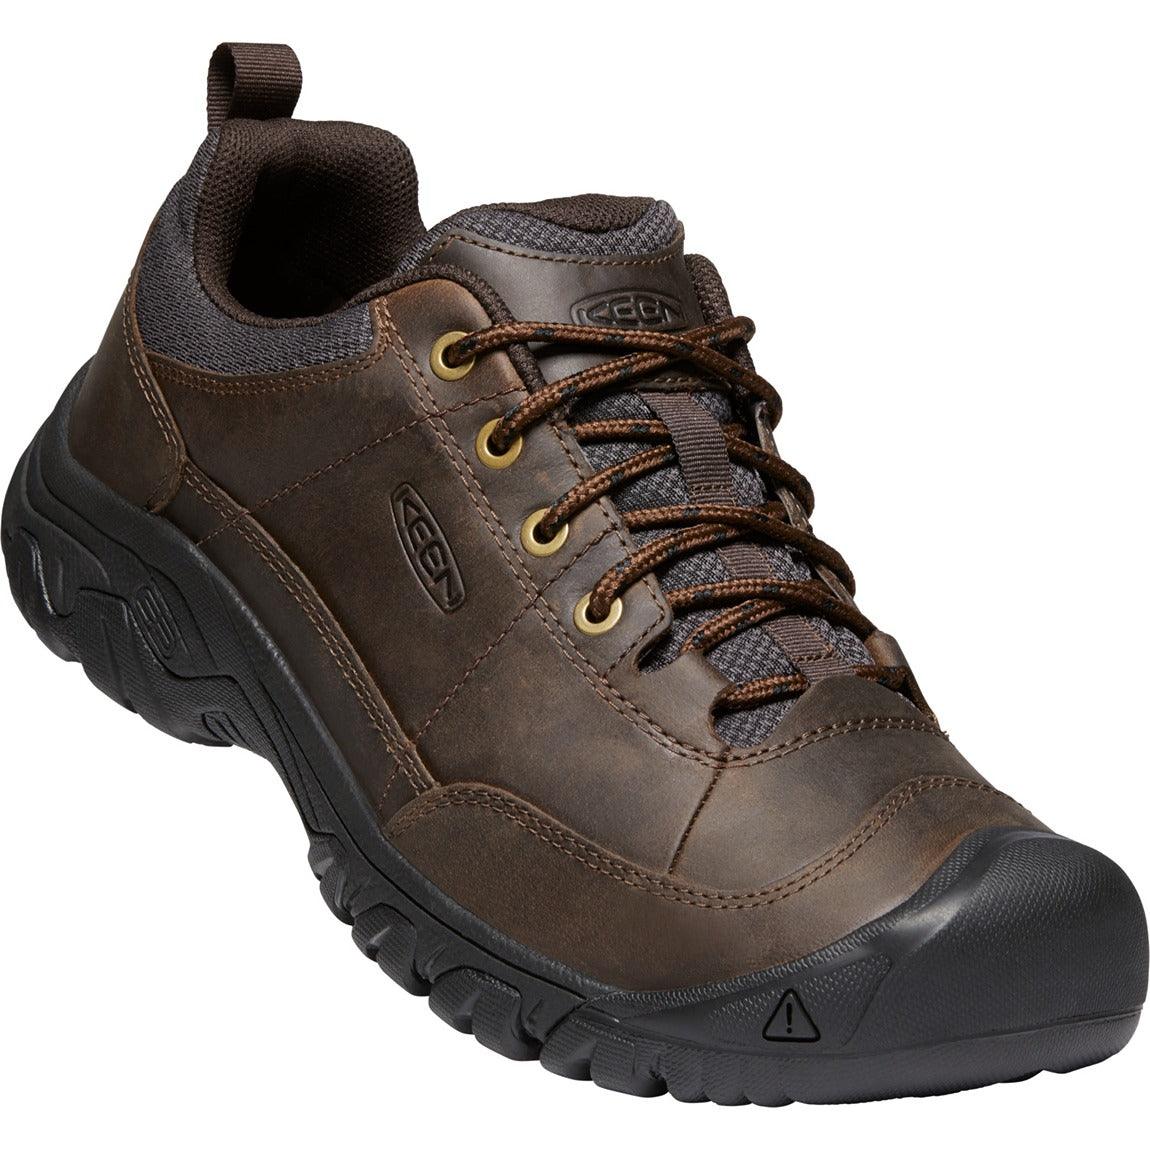 Keen Targhee III Oxford Hiking Shoes - Men - Sports Excellence